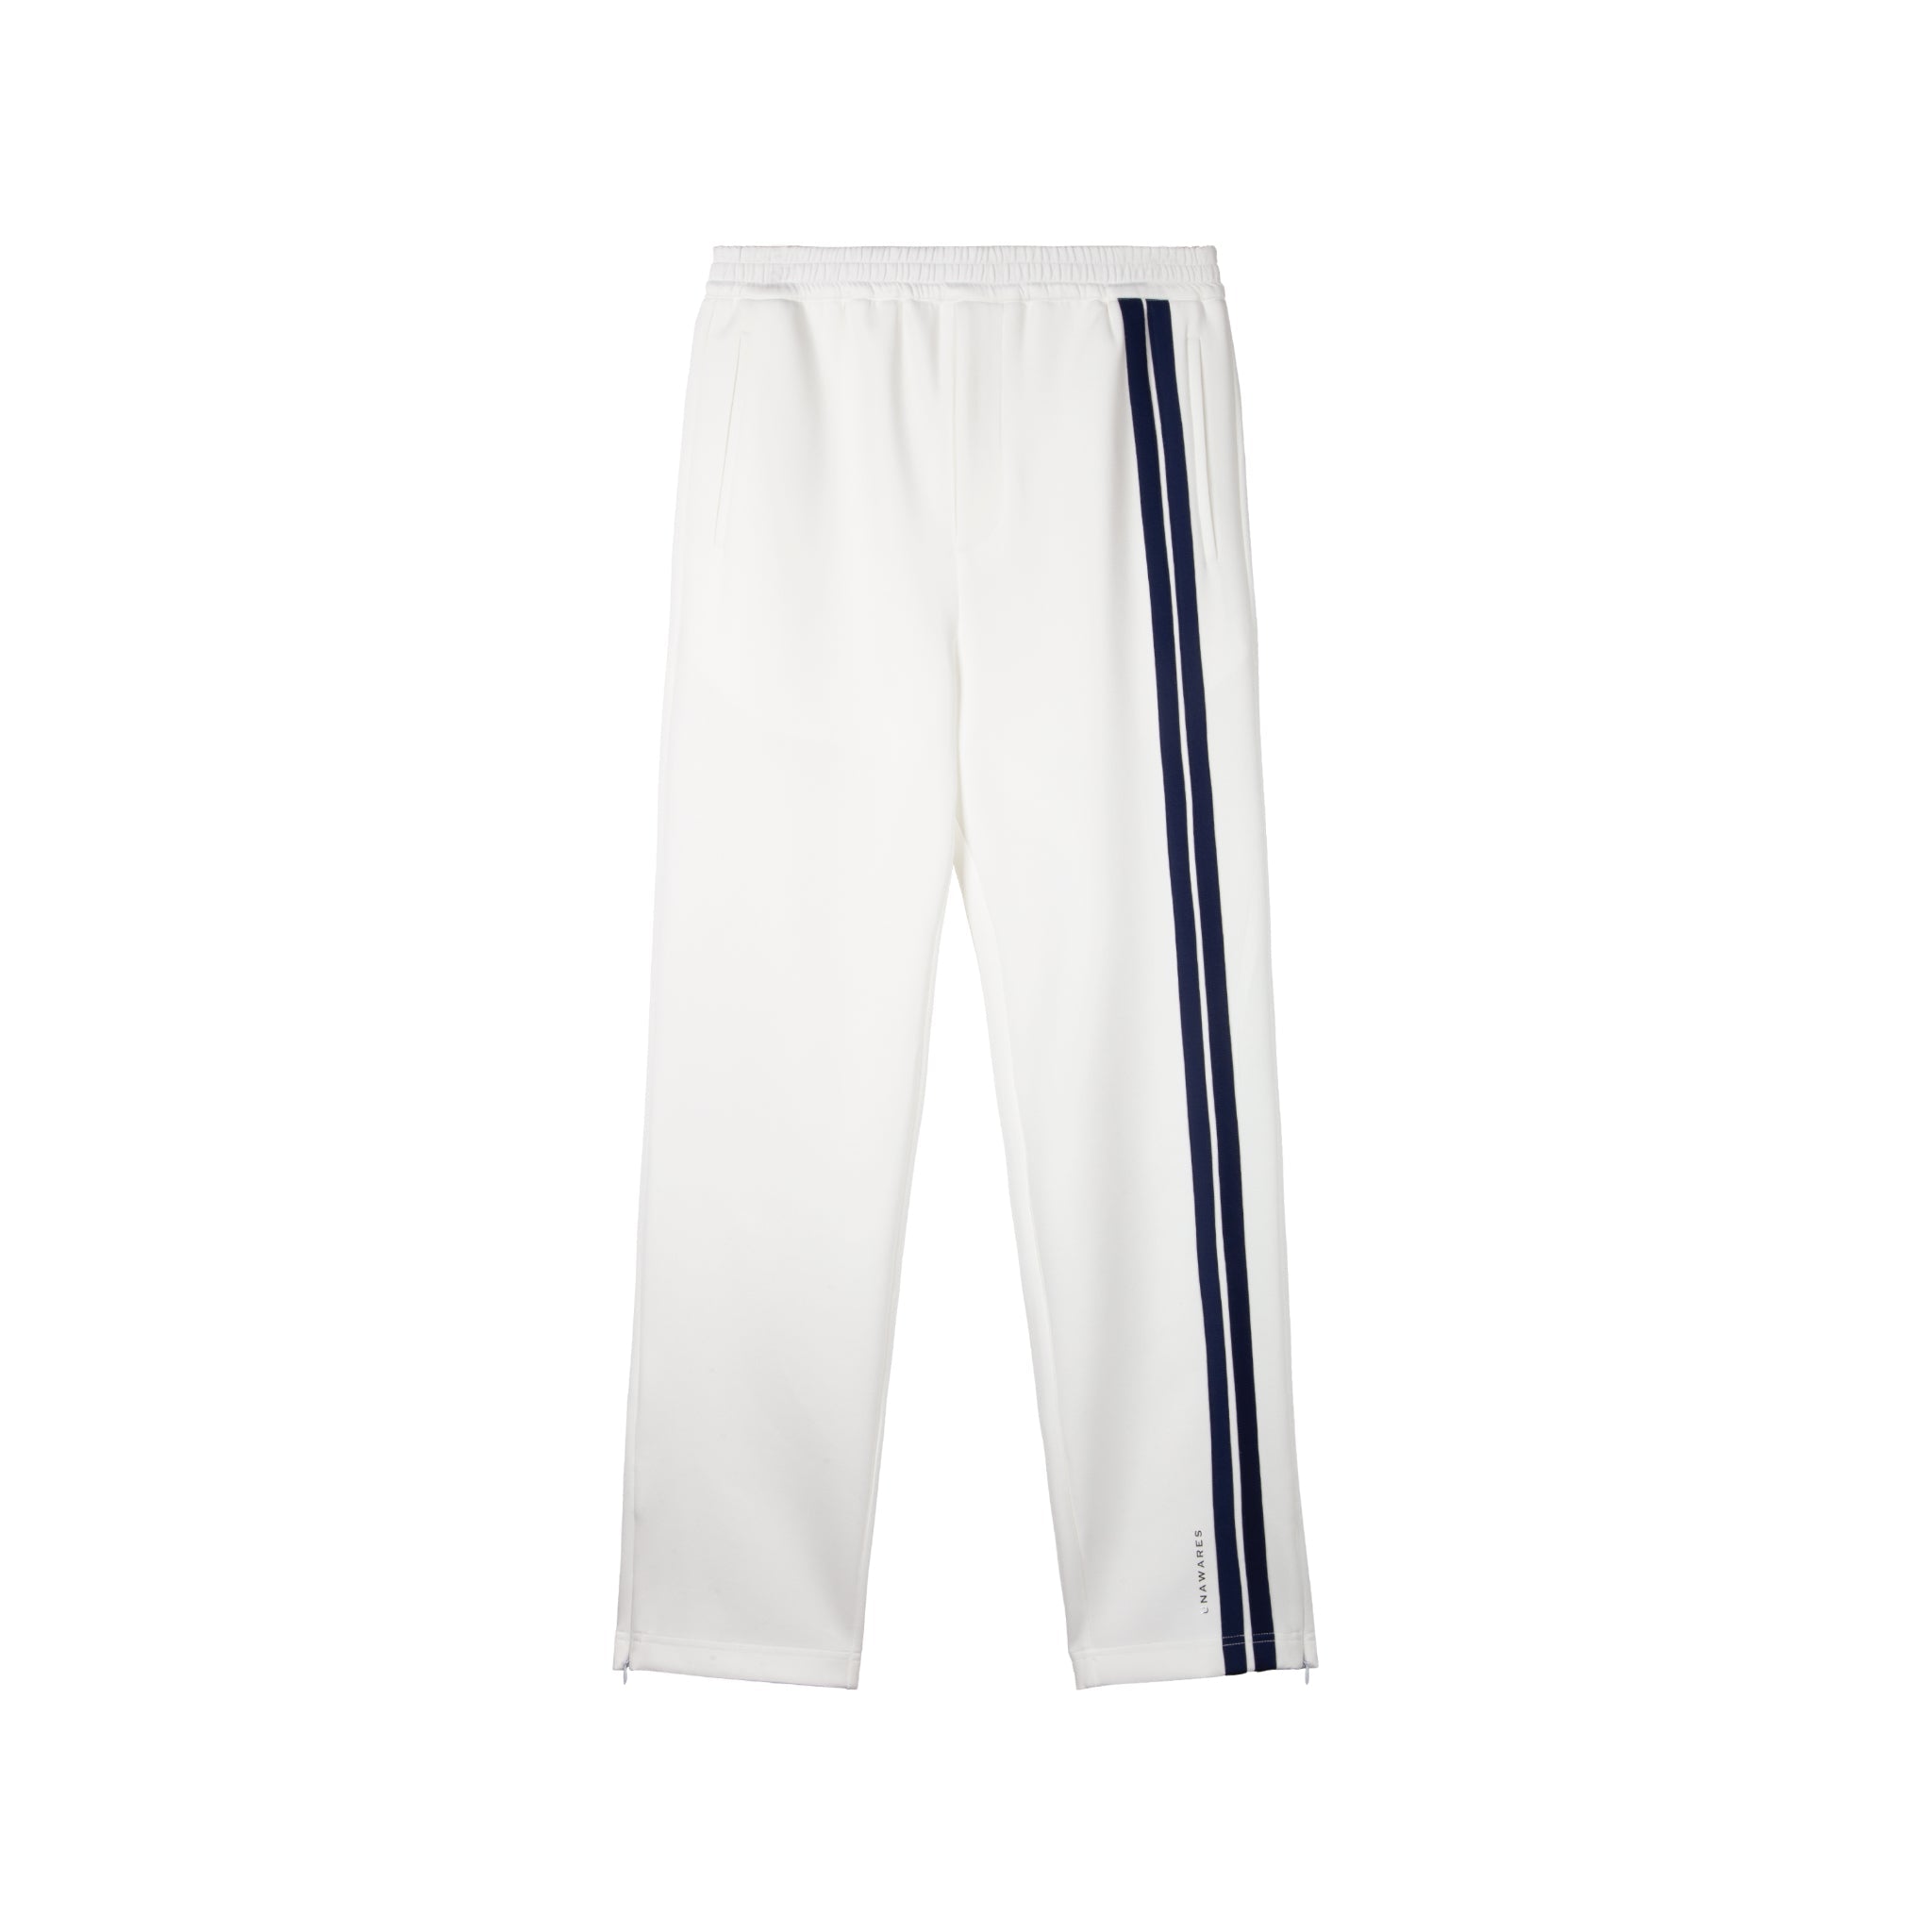 UNAWARES White Customized Silver Print with White Striped Sports Pants | MADA IN CHINA